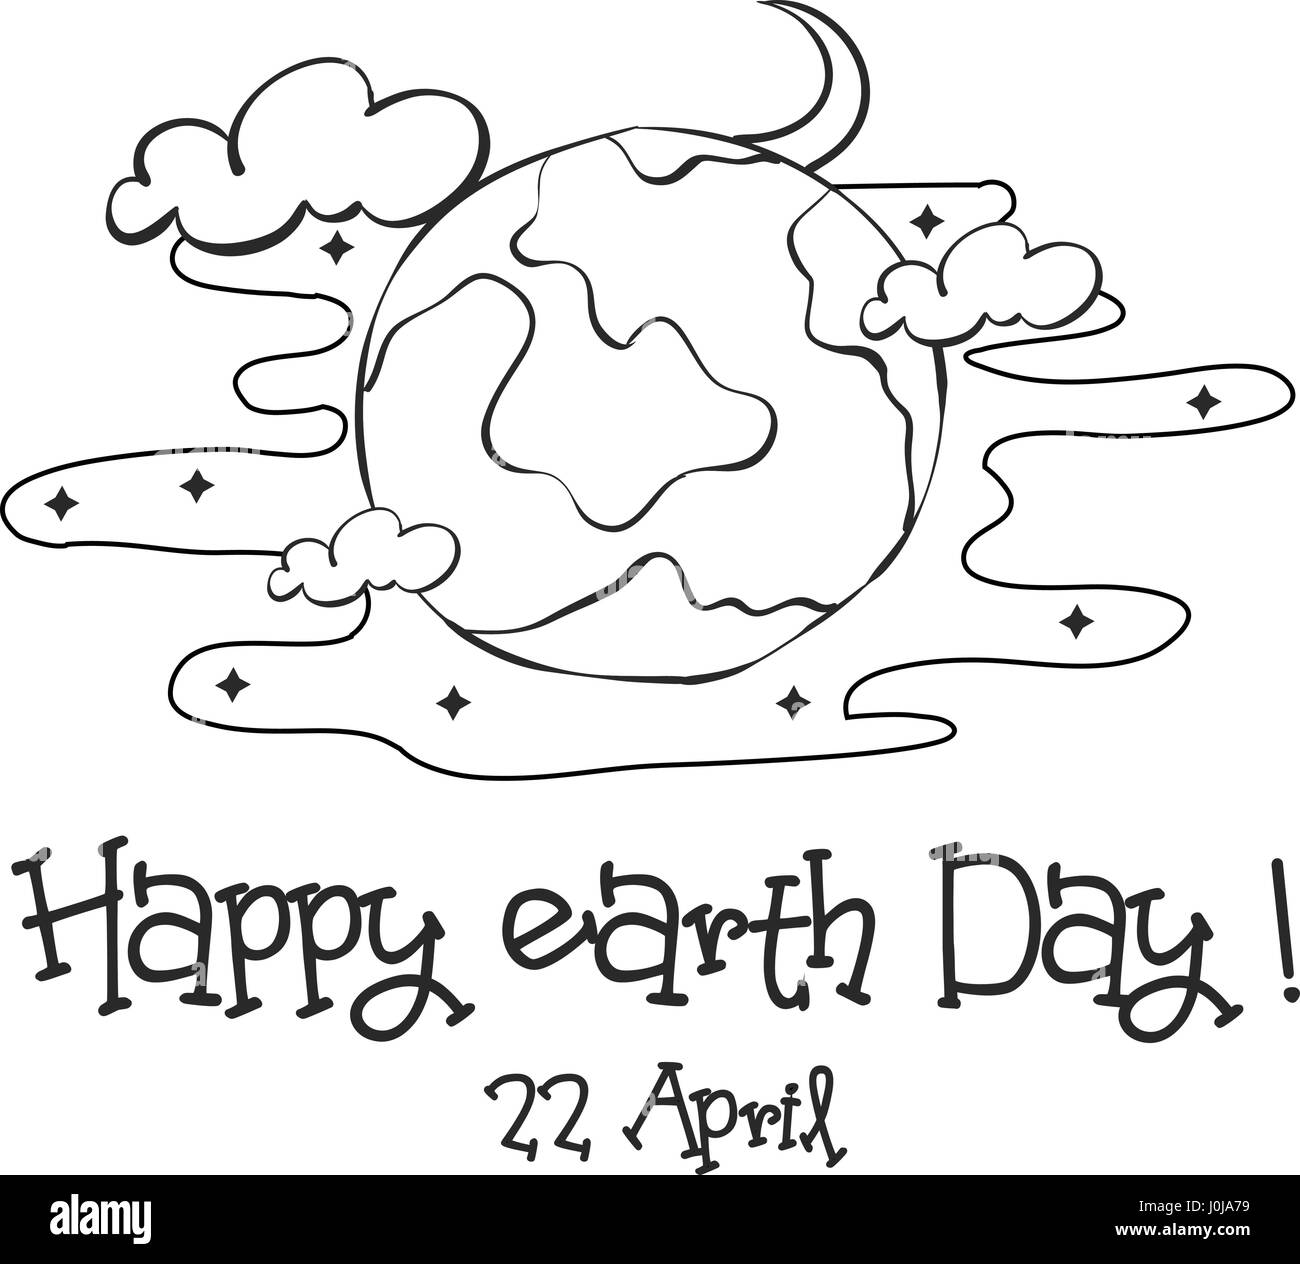 Earth Day Activities Crafts and Directed Drawing - Smitten with First